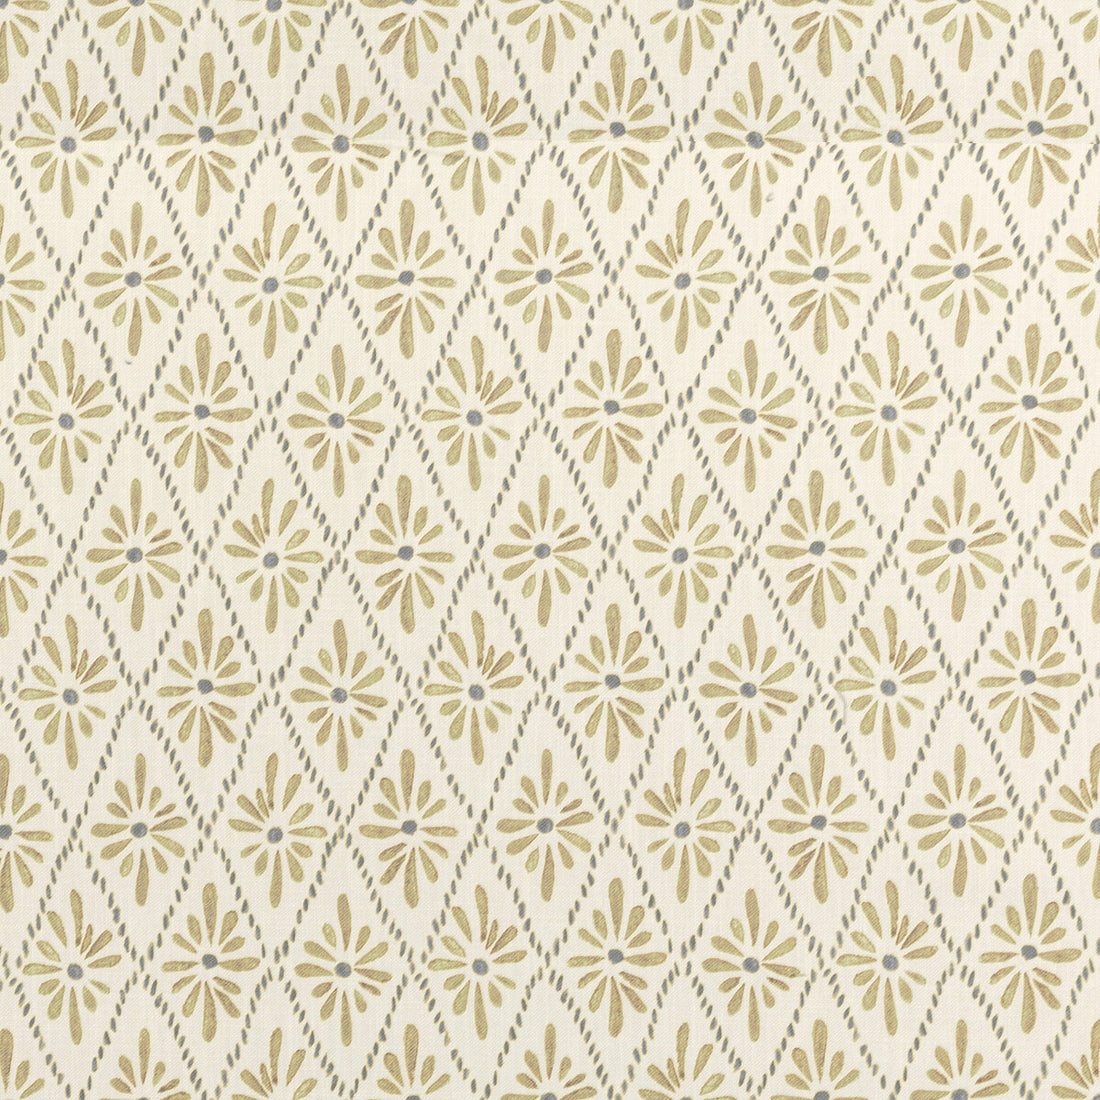 Malina fabric in sparrow color - pattern MALINA.16.0 - by Kravet Basics in the Monterey collection